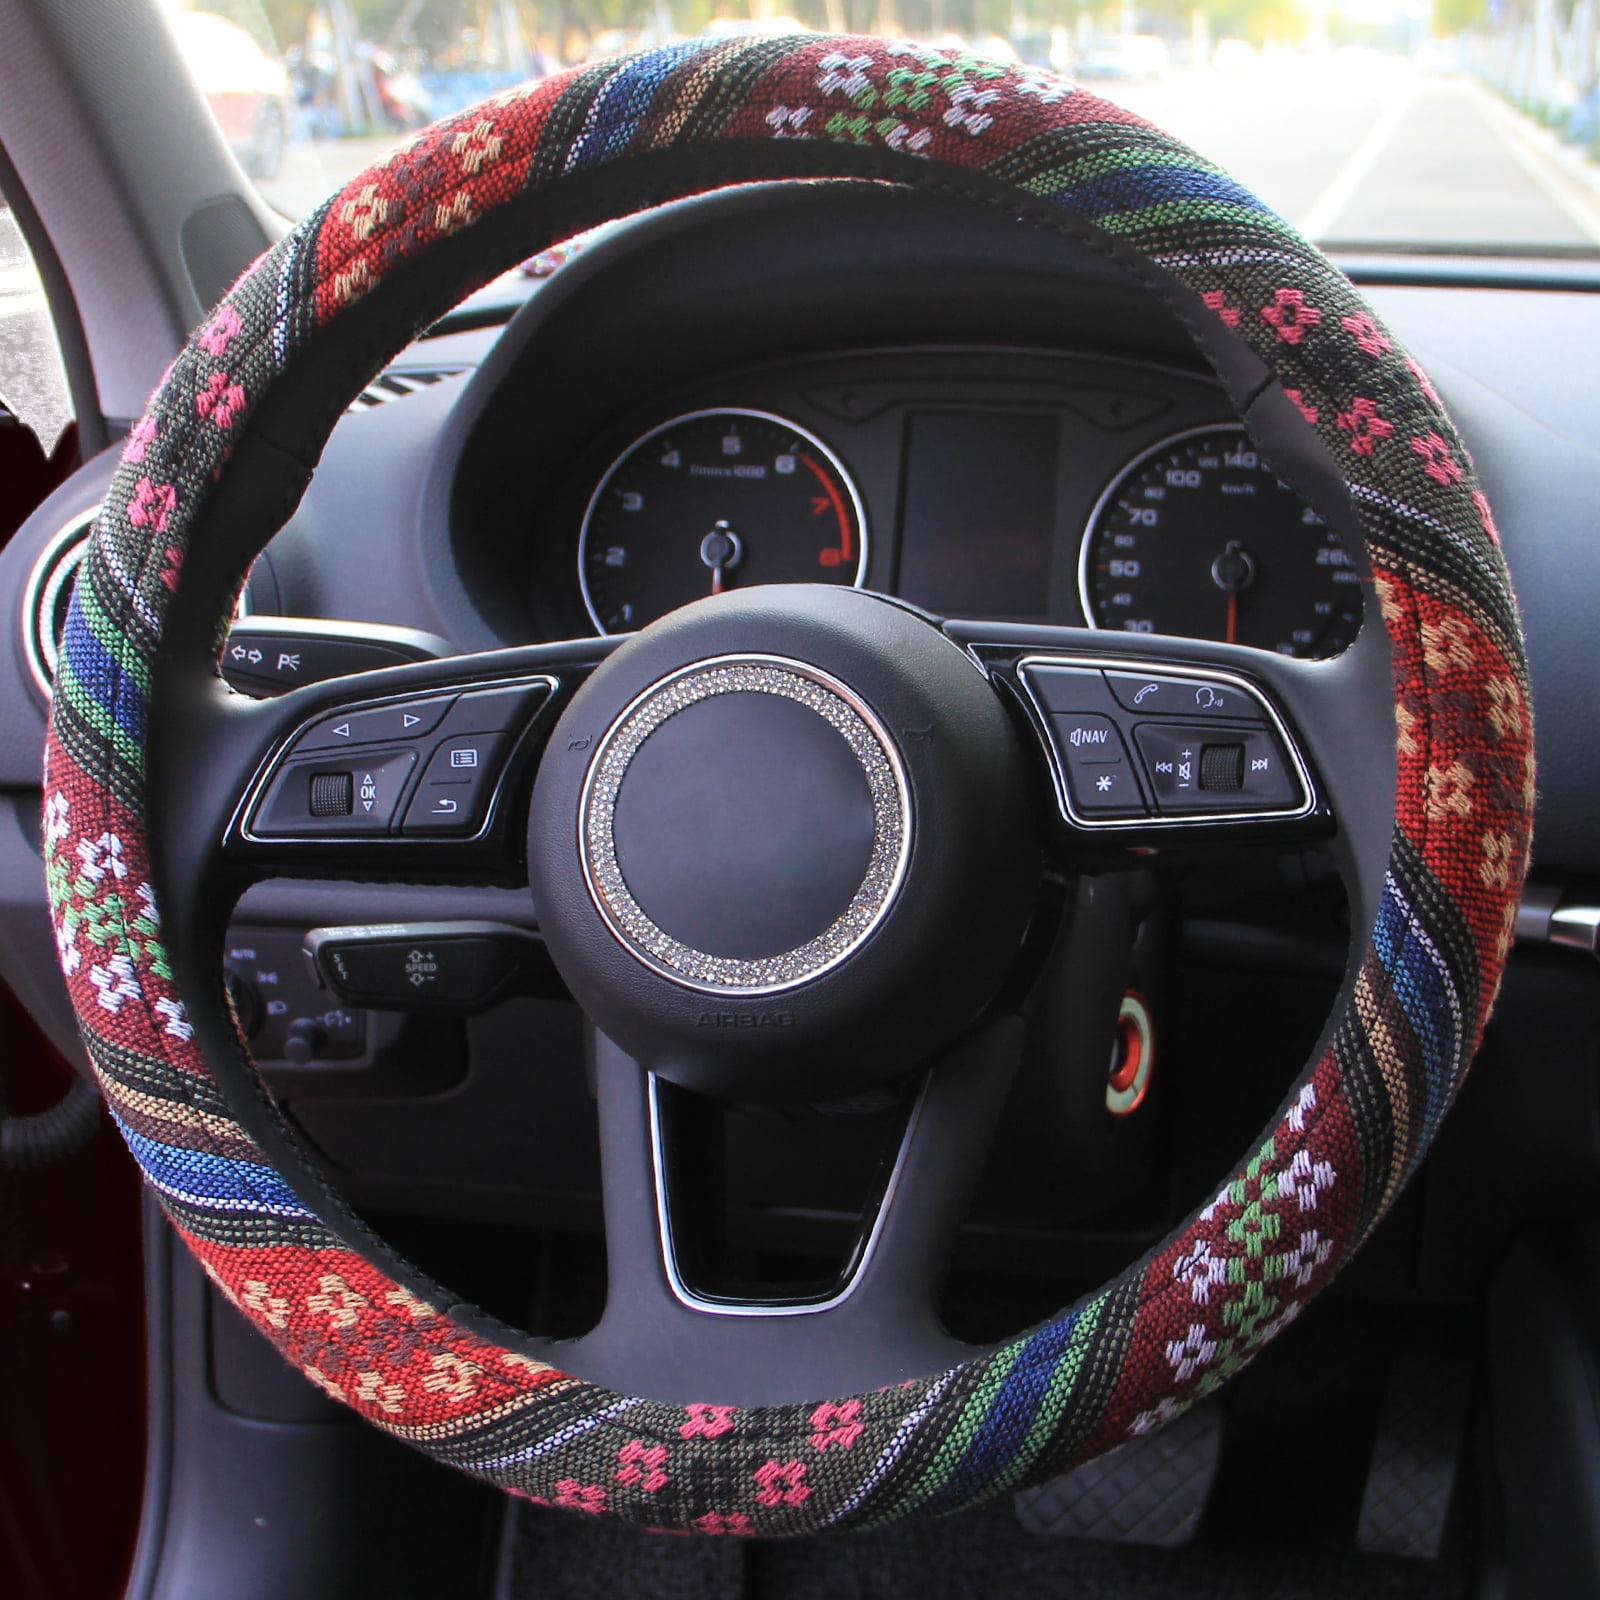 Copap Car Steering Wheel Cover 15 inch Baja Blanket Ethnic Style Woven Cloth Fit Most Auto Cars Bule & Red Coarse Flax Cloth 